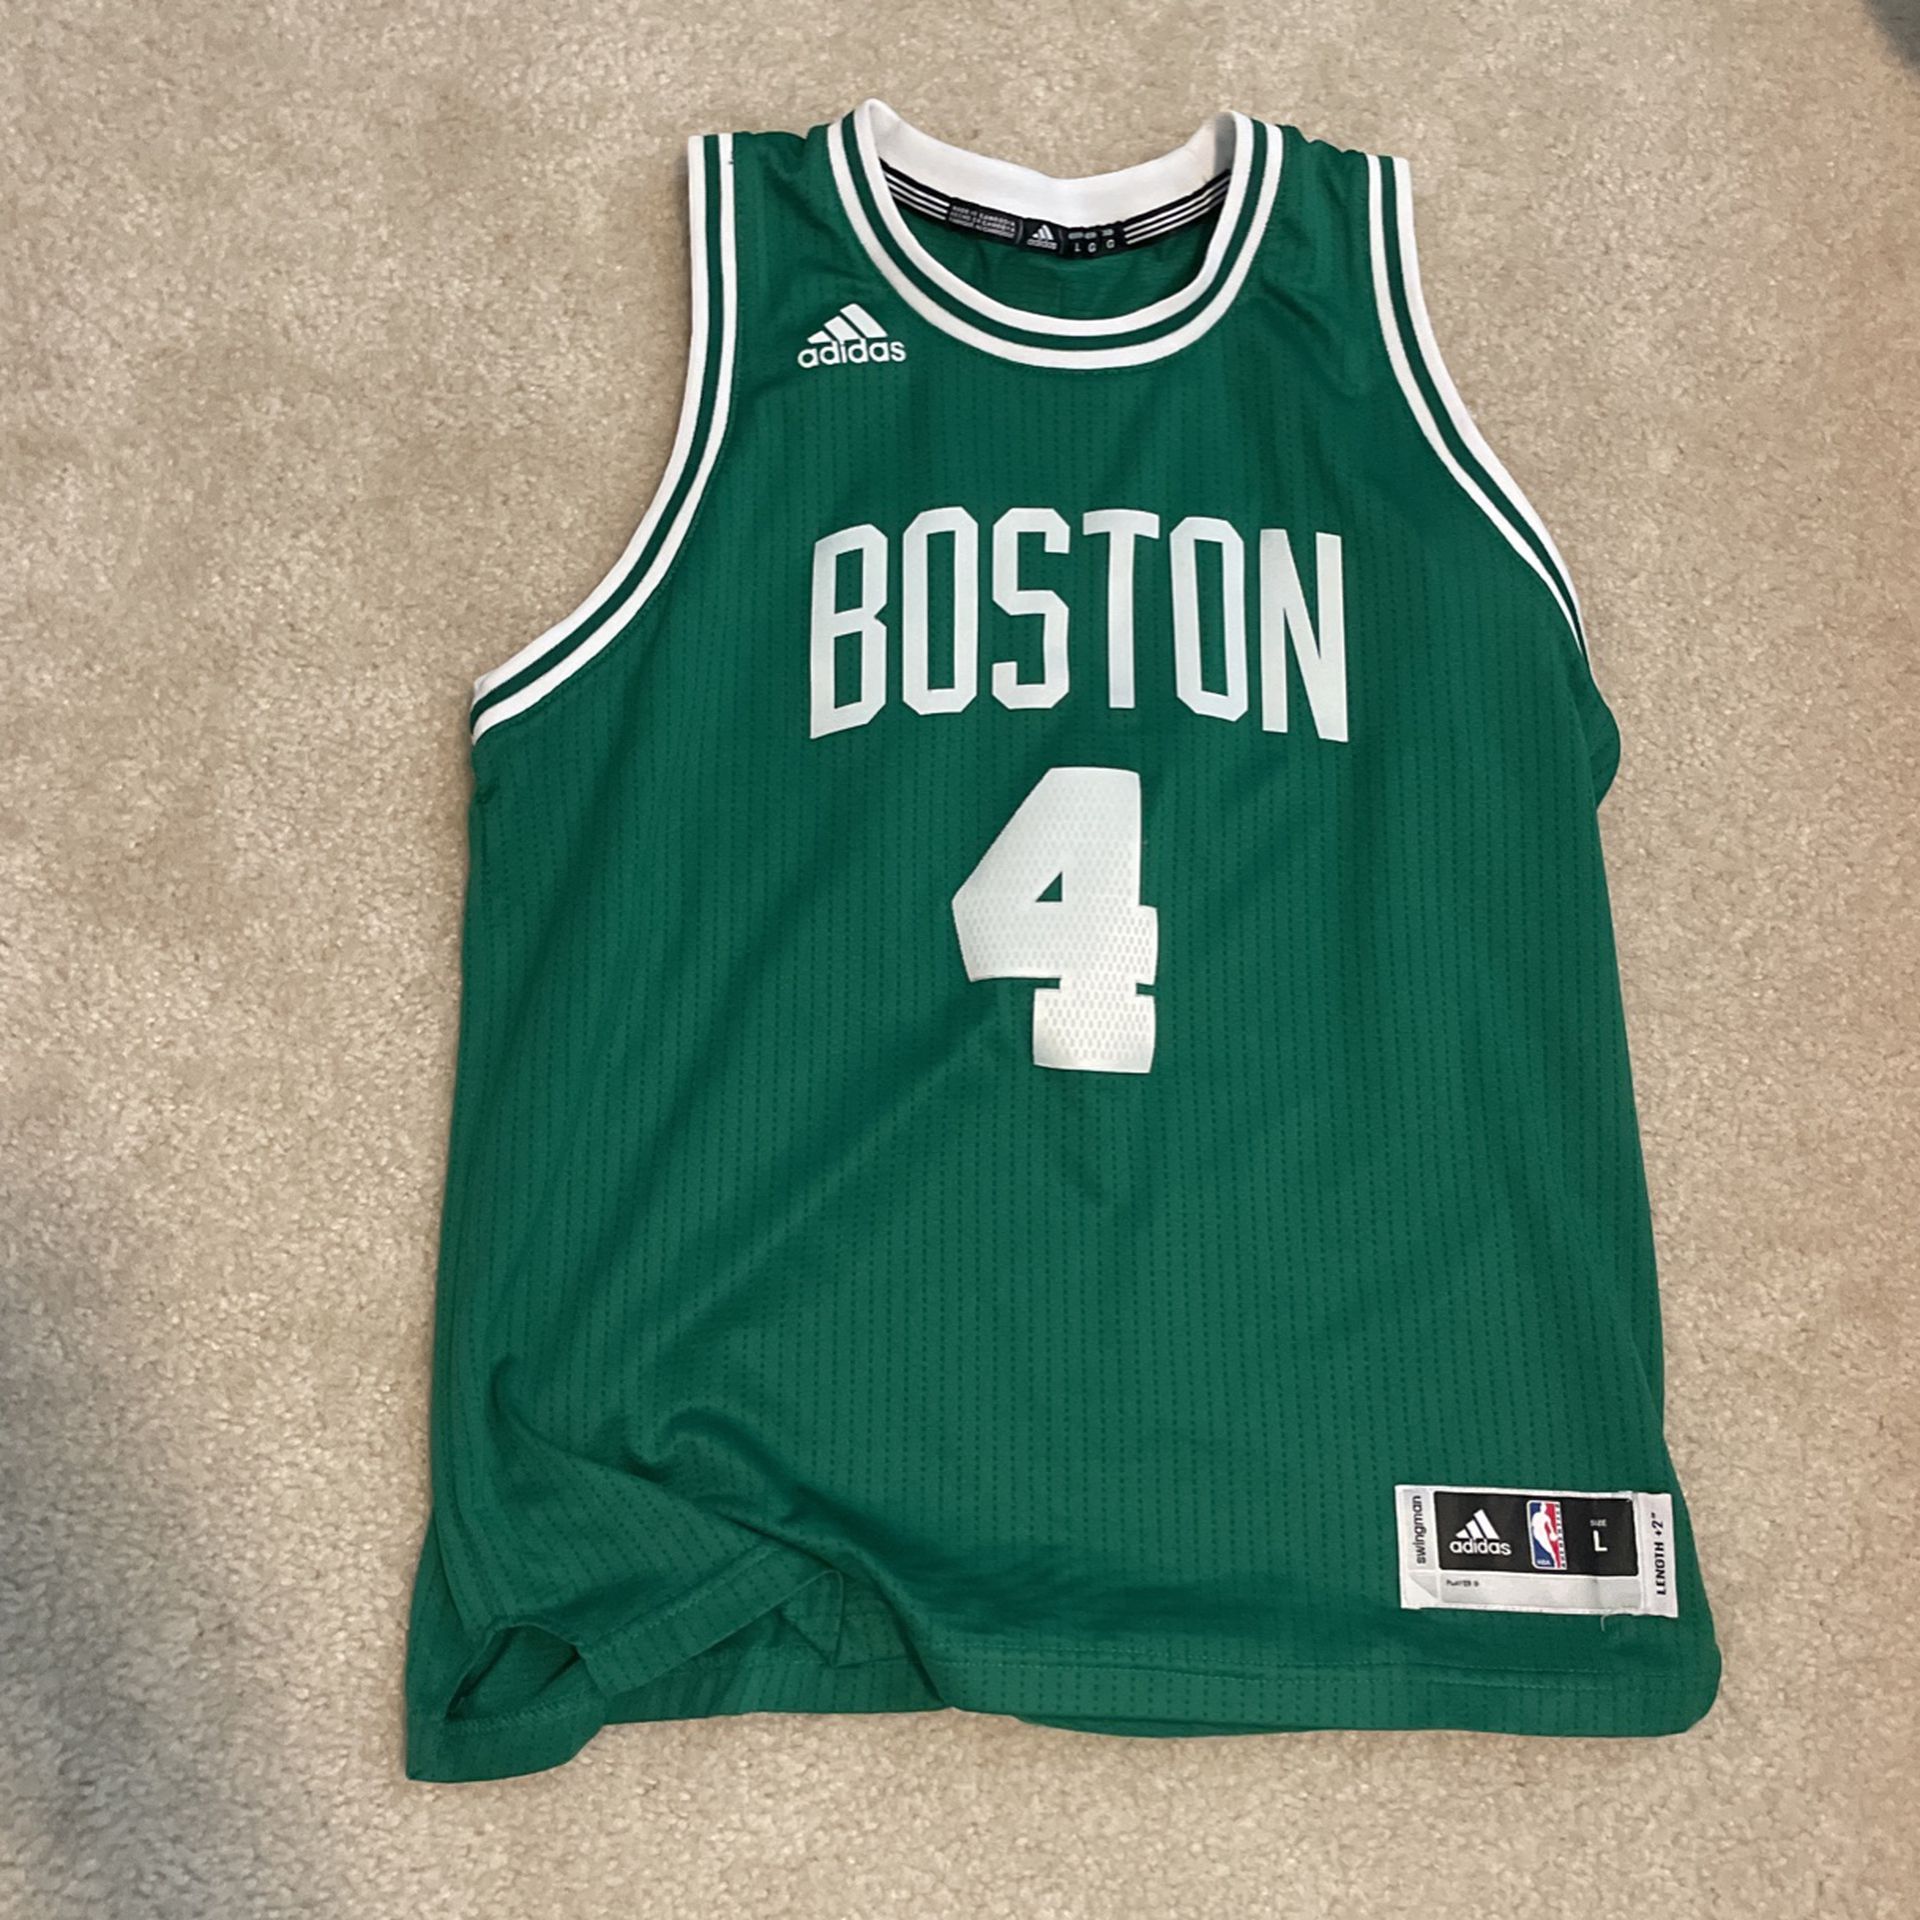 Isaiah Thomas Authentic Jersey 2x for Sale in Flat Rock, MI - OfferUp